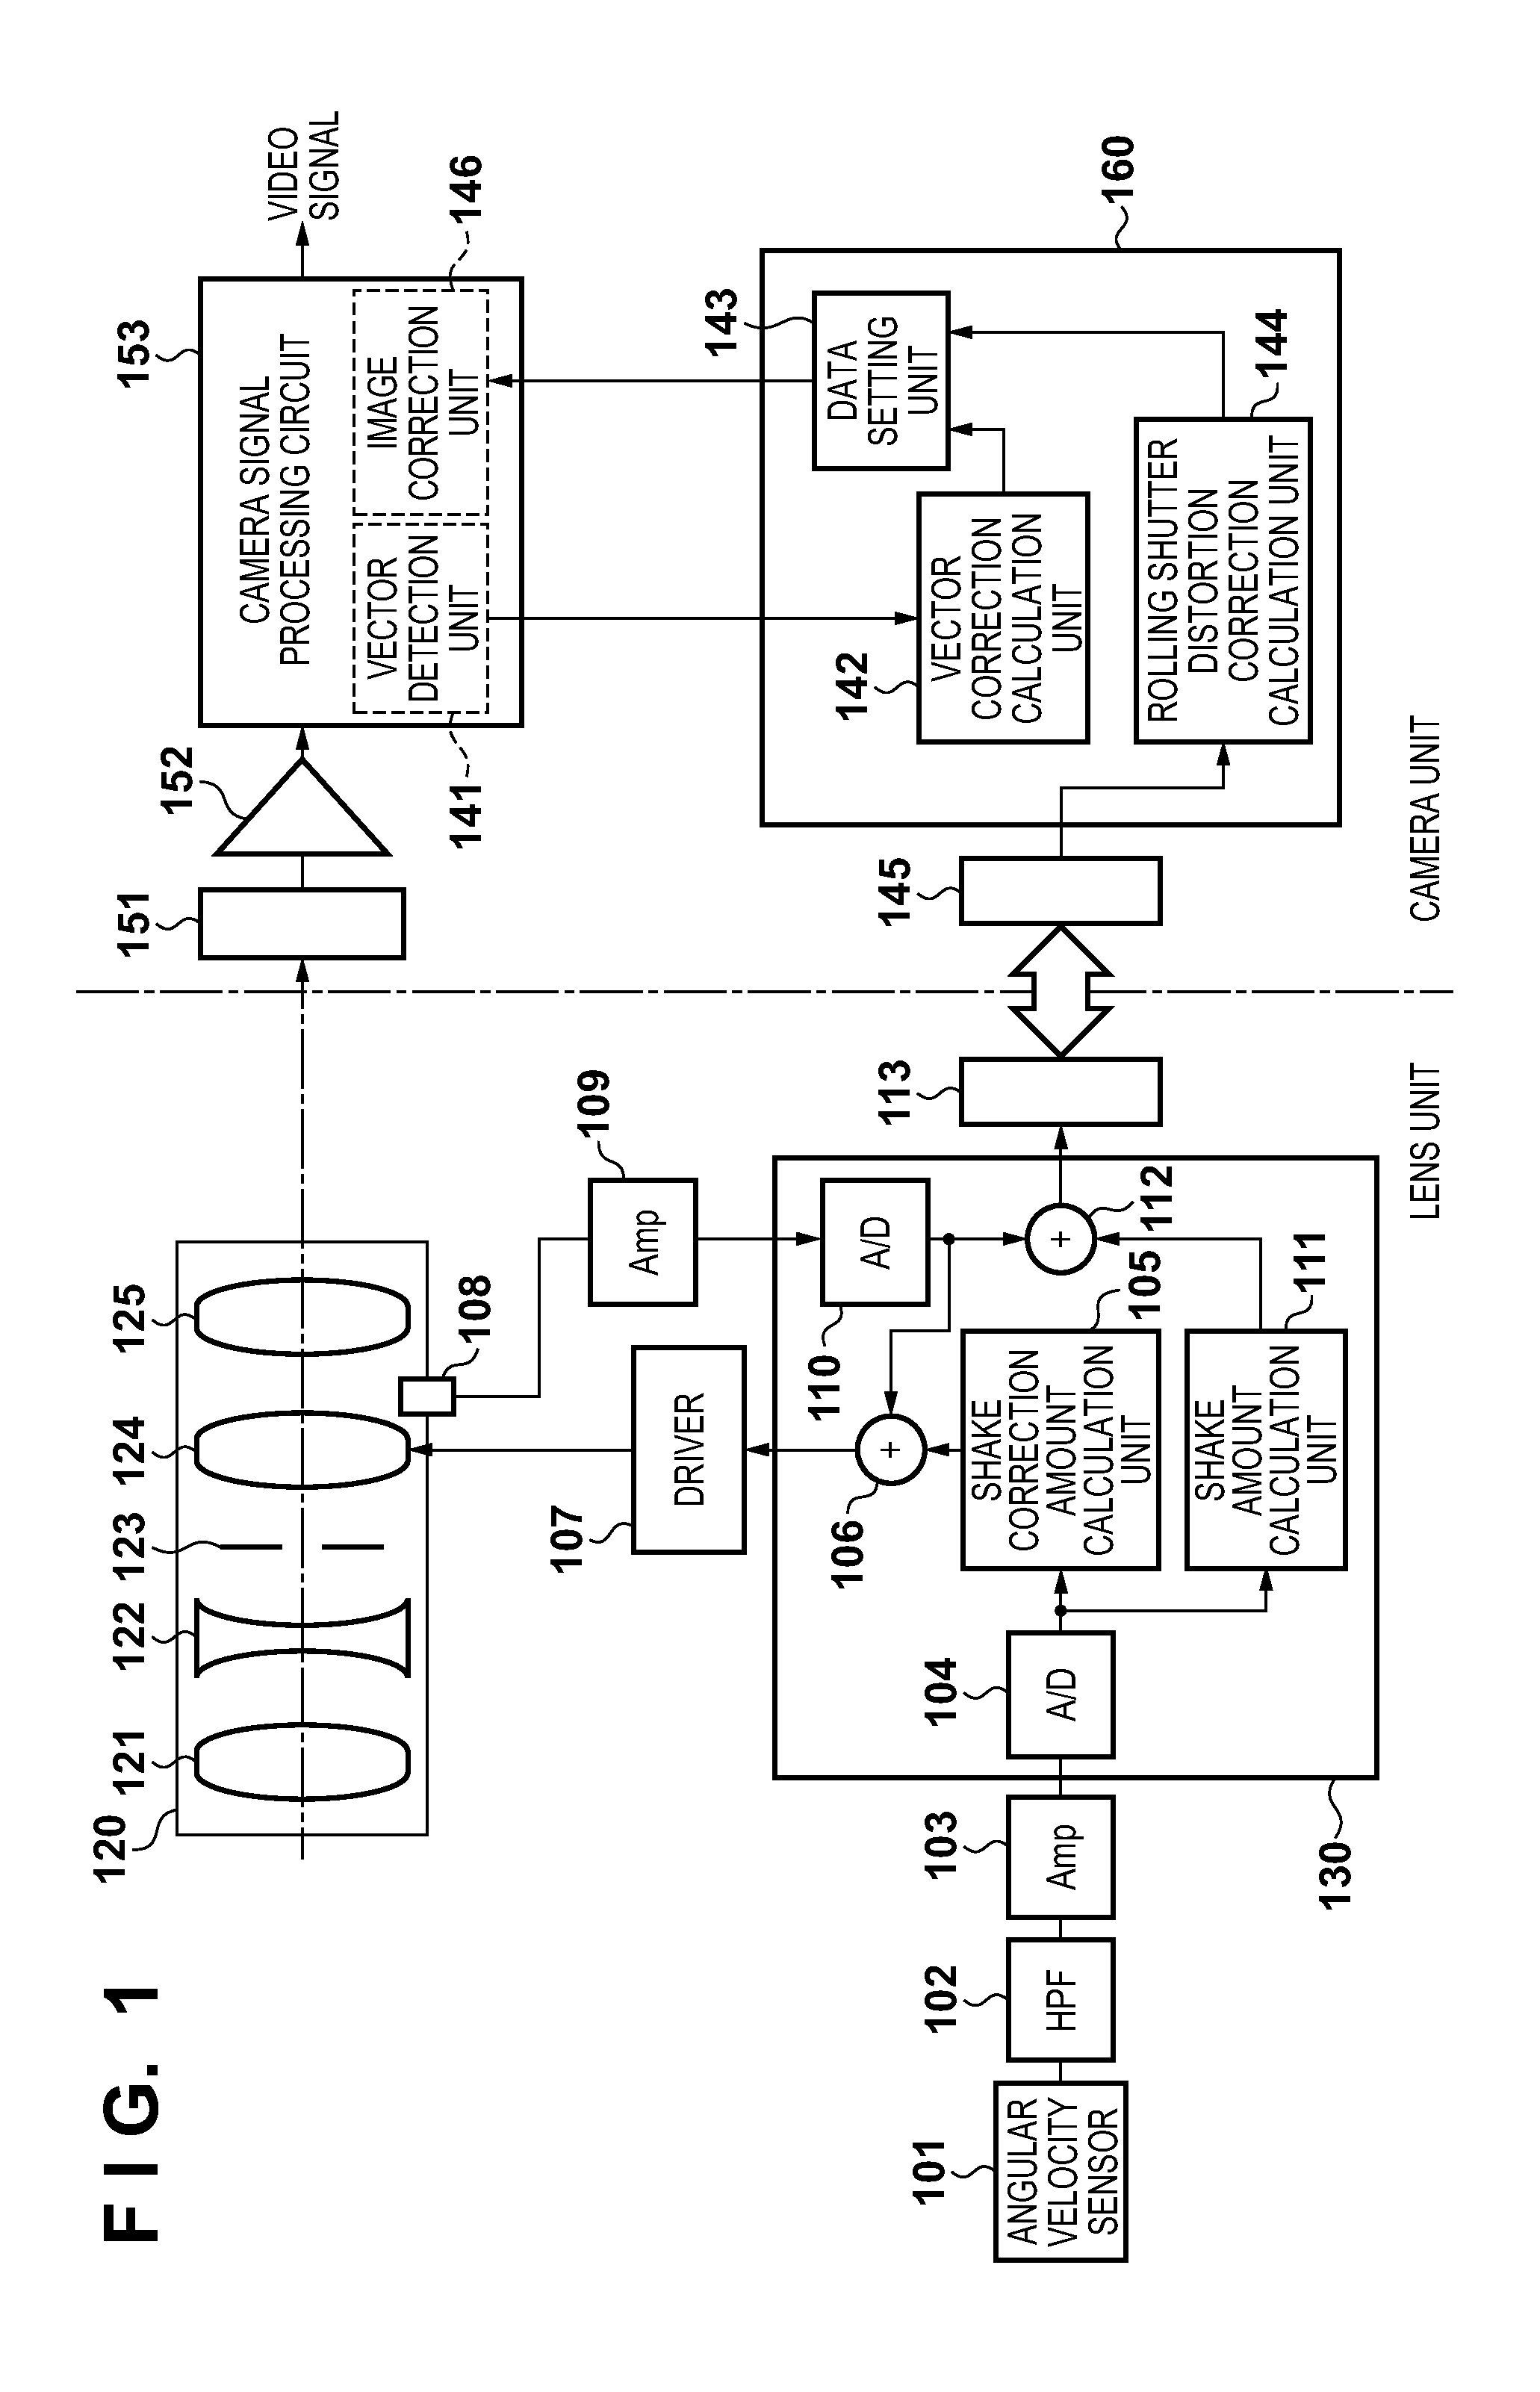 Image capture system, control method thereof and image capture apparatus